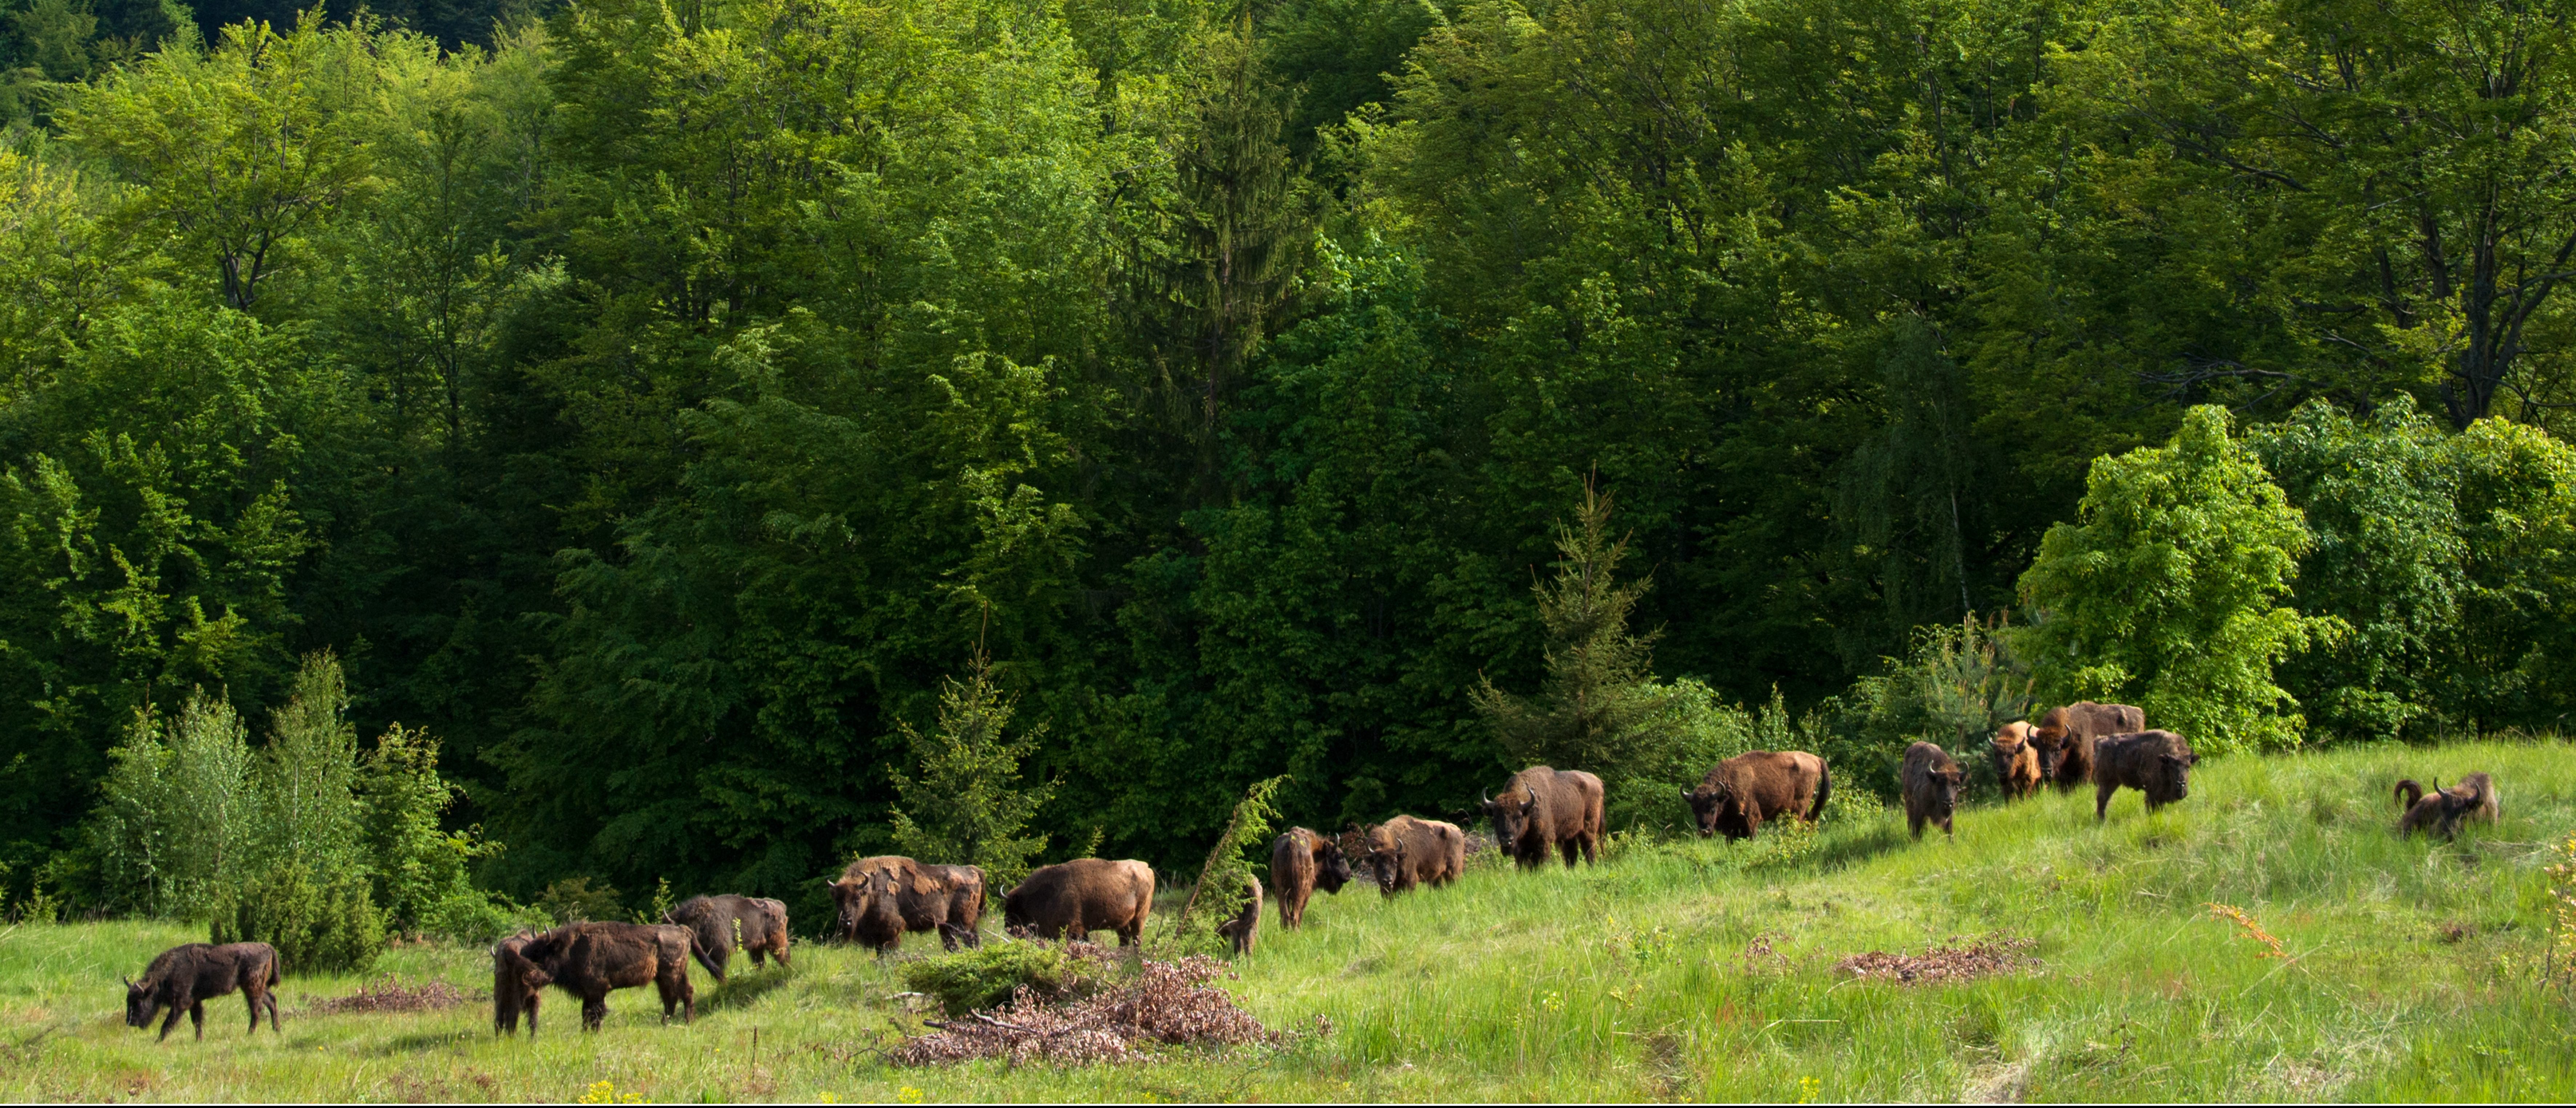 In the Southern Carpathians rewilding area in Romania, Rewilding Europe and WWF Romania are working hard to ensure the connectivity and genetic diversity of reintroduced sub-populations of European bison.